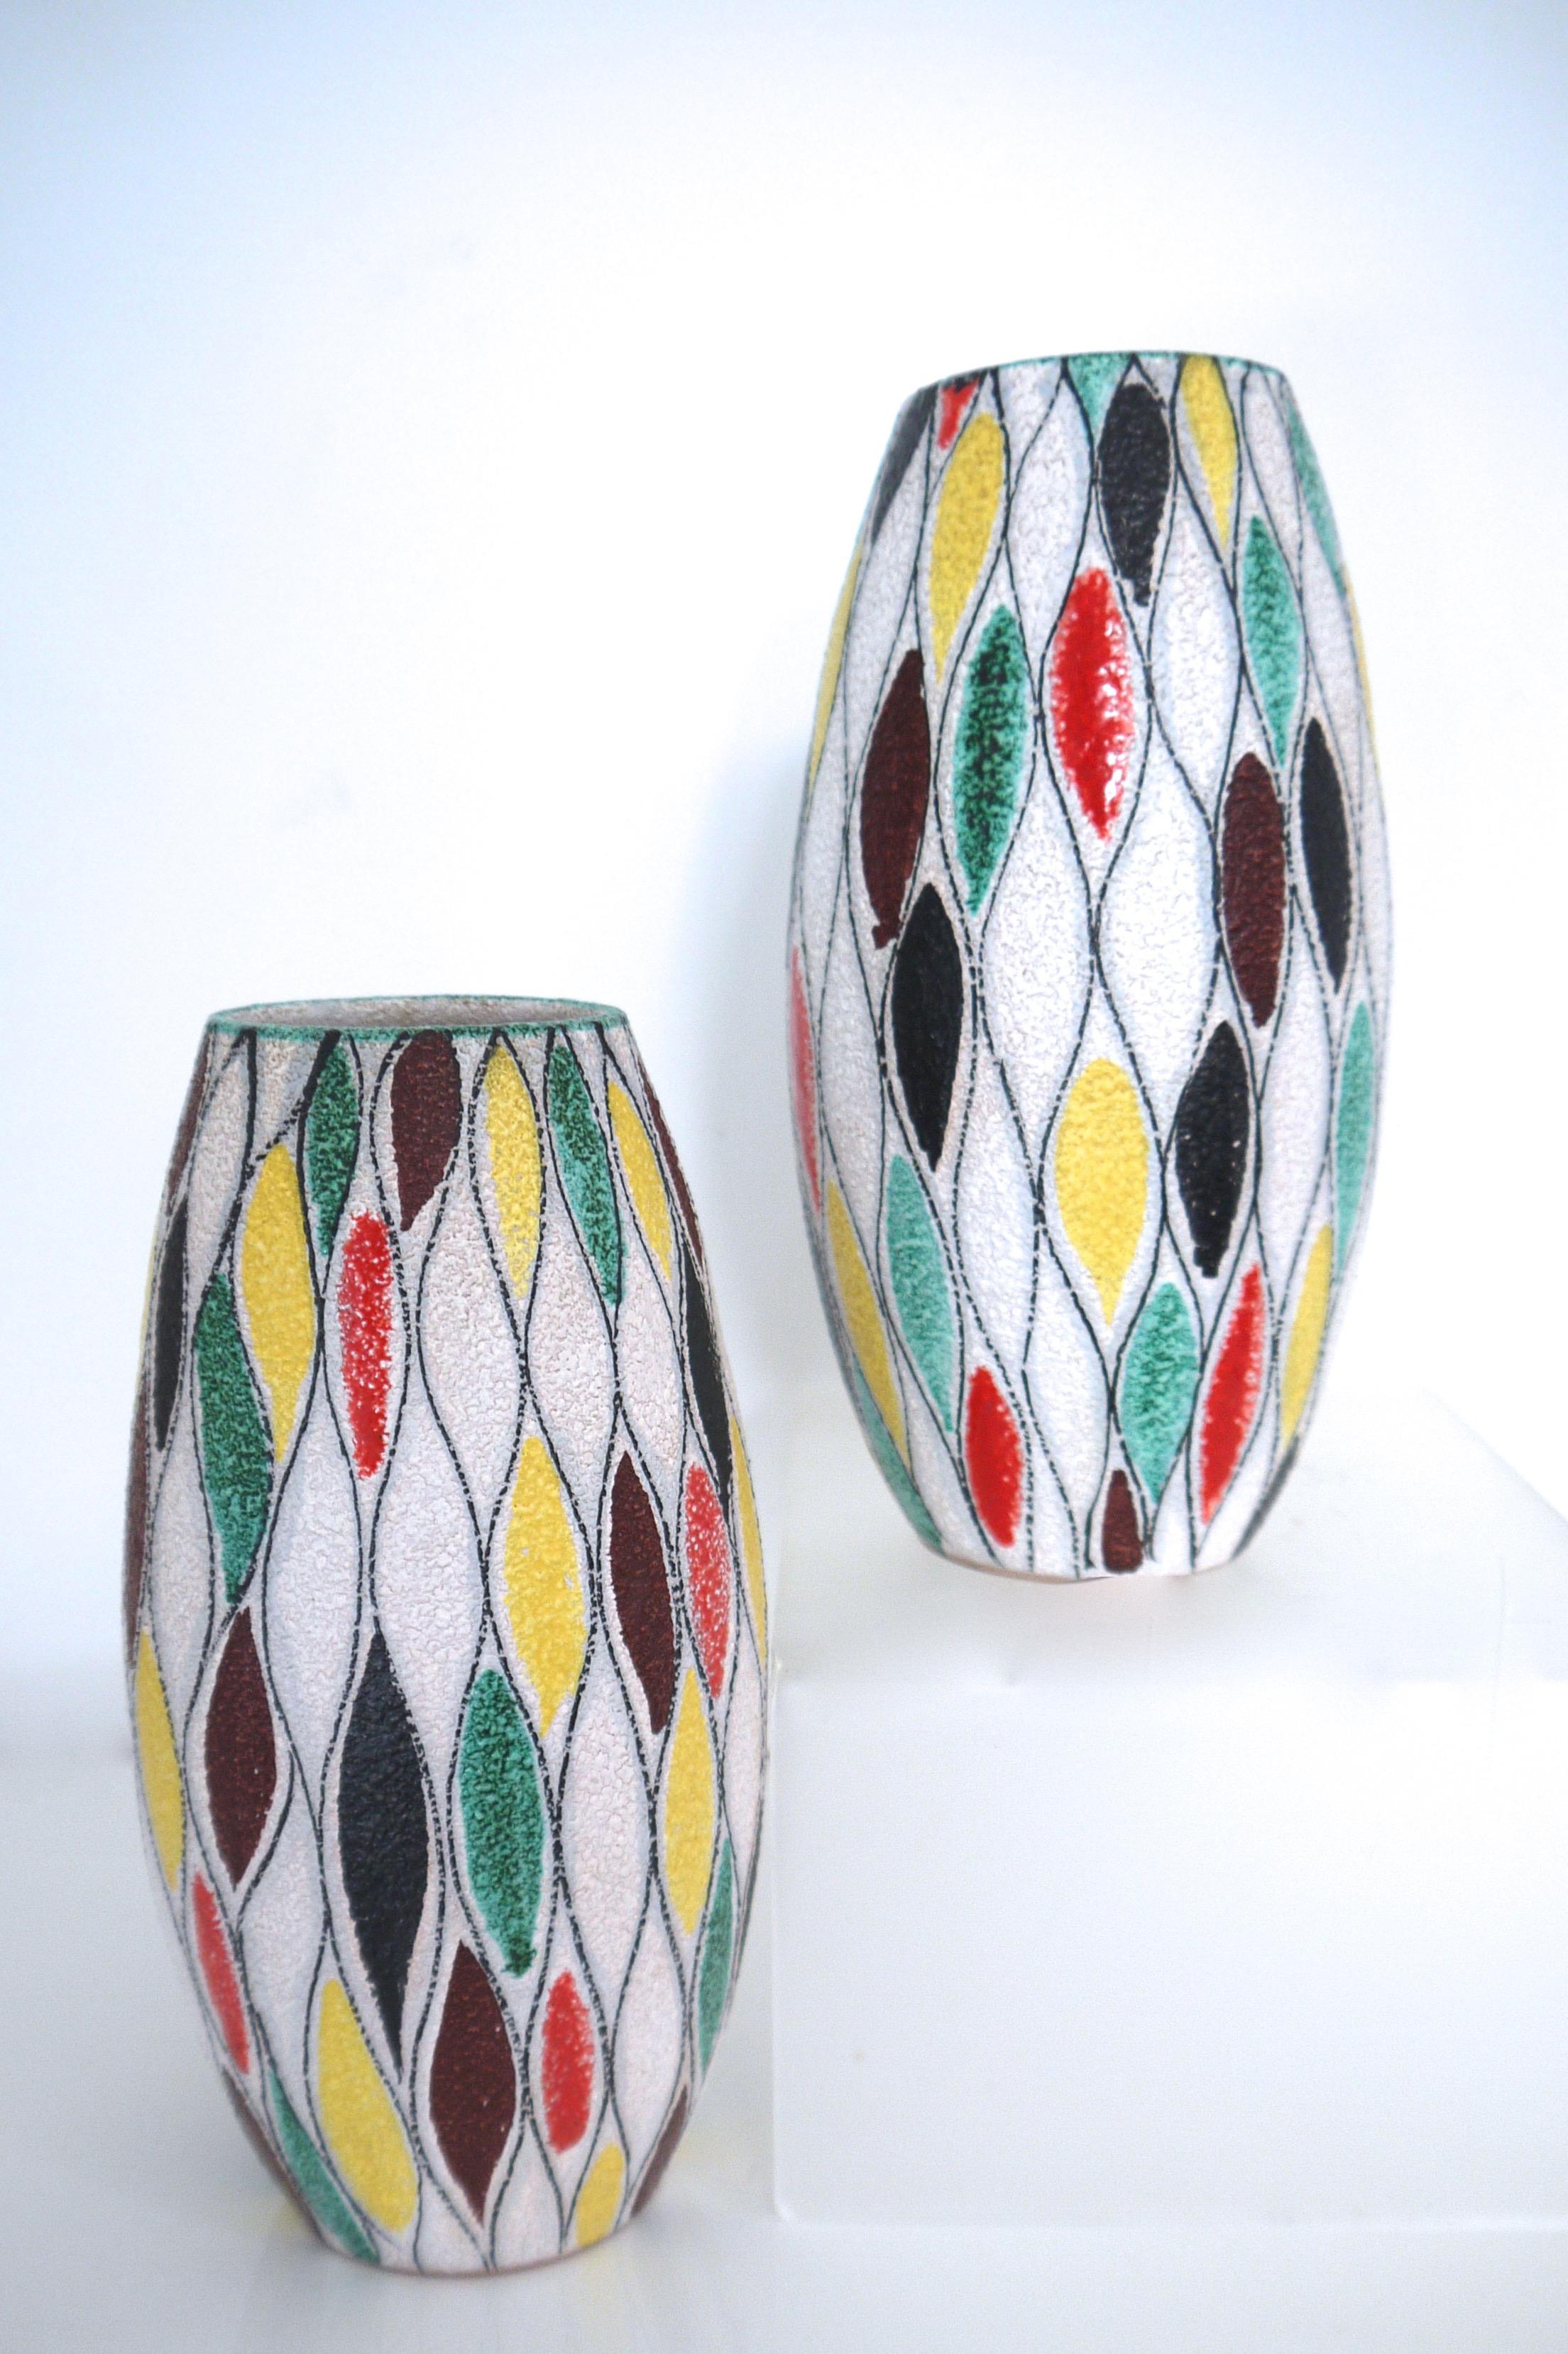 Fratelli Fanciullacci Modernist Matching Vases 1965, Signed  In Good Condition For Sale In Halstead, GB